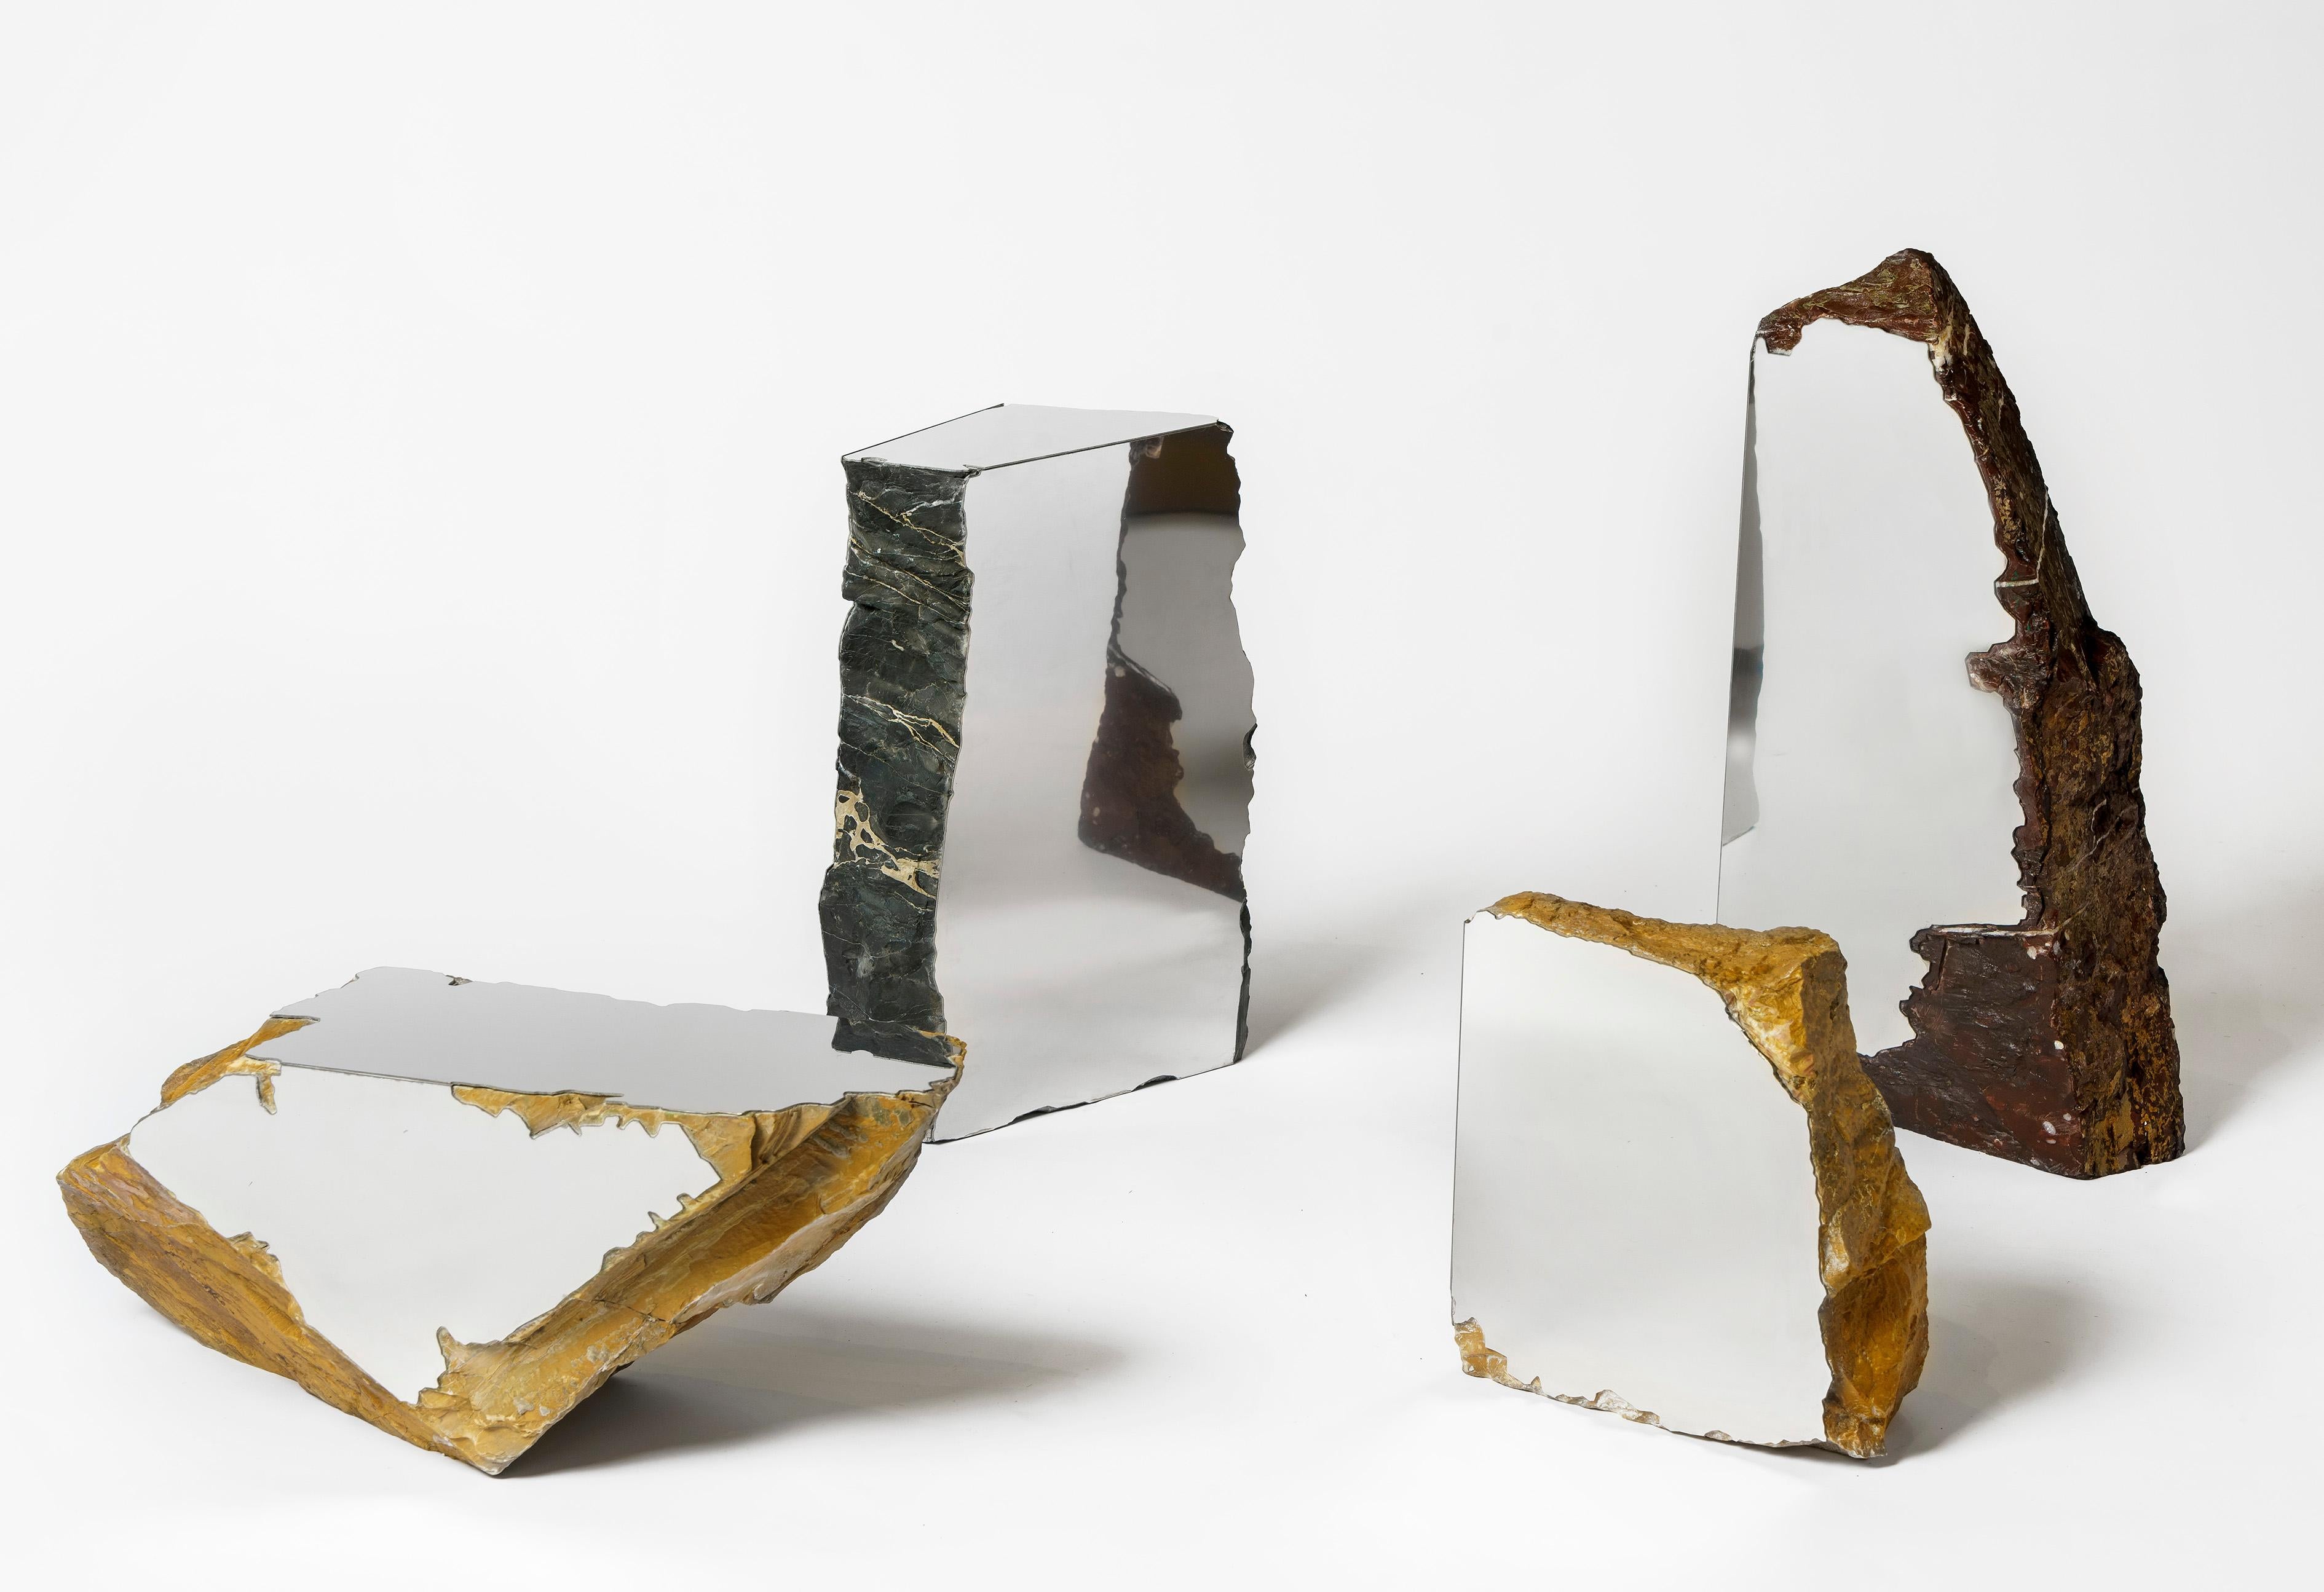 Gambi’s process is first guided by chance and intuition and then by precision and skill. He found the marble used in the collection by visiting stone yards in Carrara and searching for evocative off-cut shapes. He then translated that shape into 2D